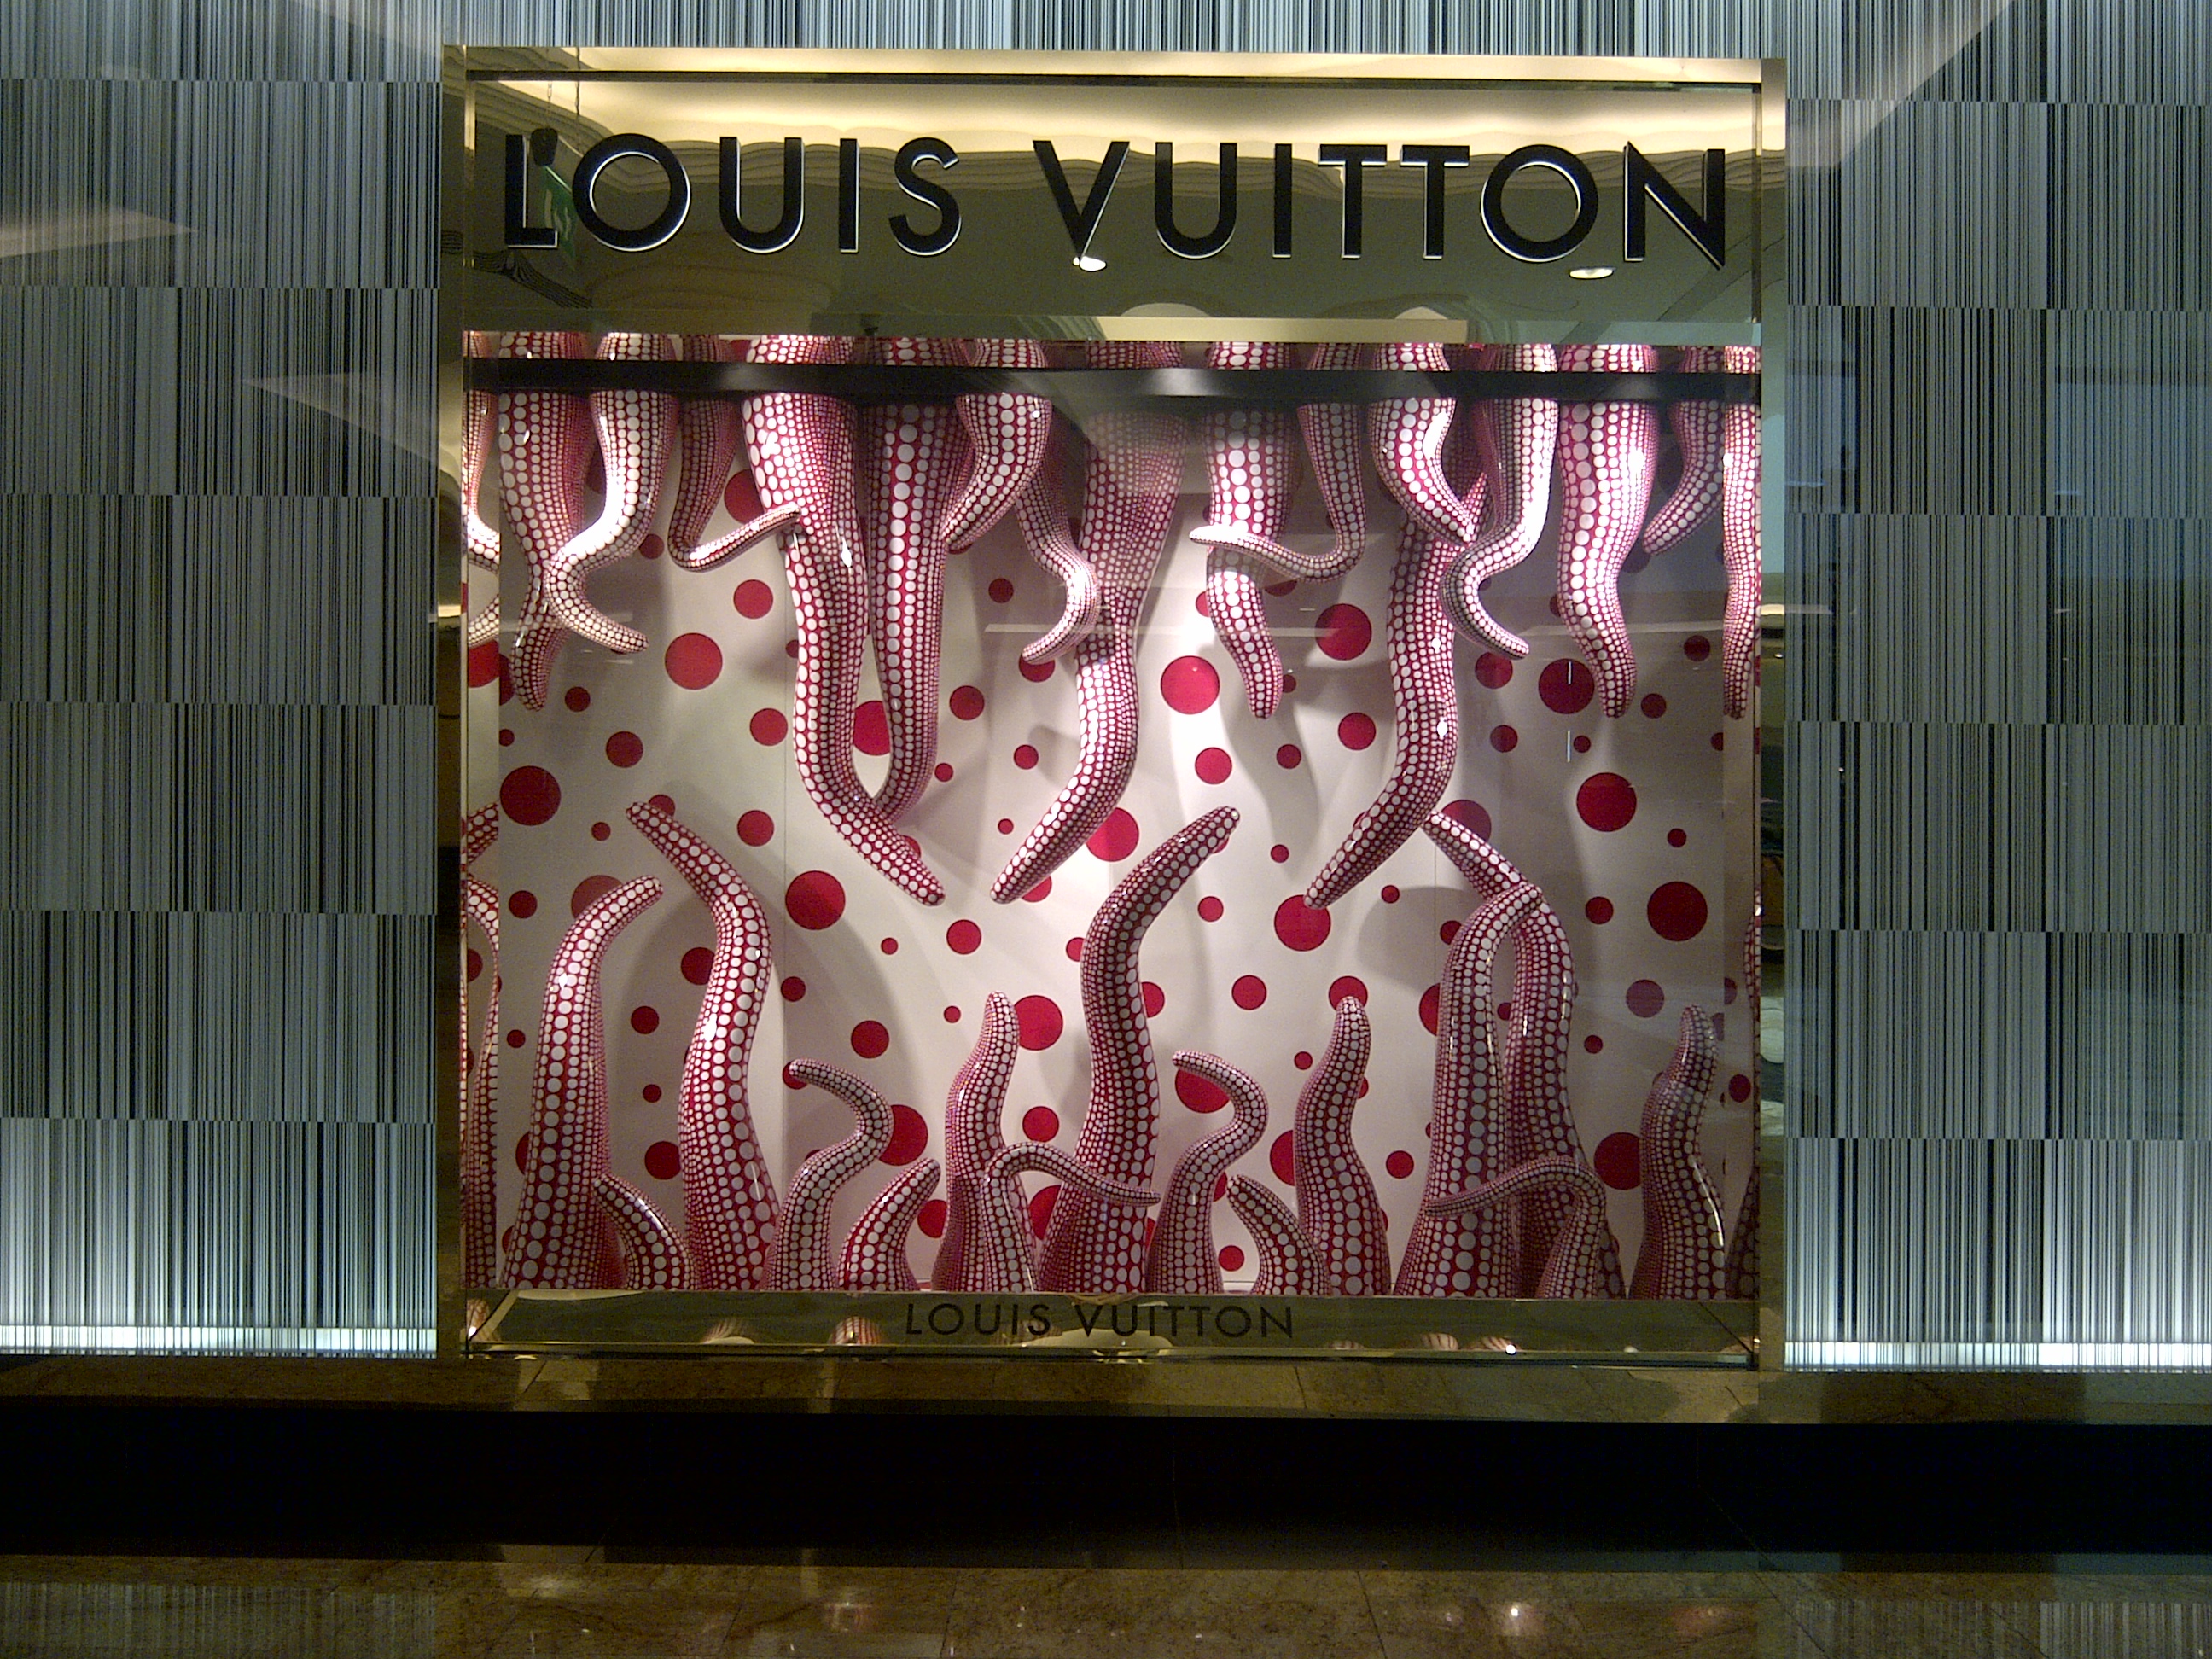 SHOPPING DAY IN LOUIS VUITTON in DUBAI MALL!My LV SHOPPING VLOG/NEW  COLLECTION of BAG and SHOES 2023 